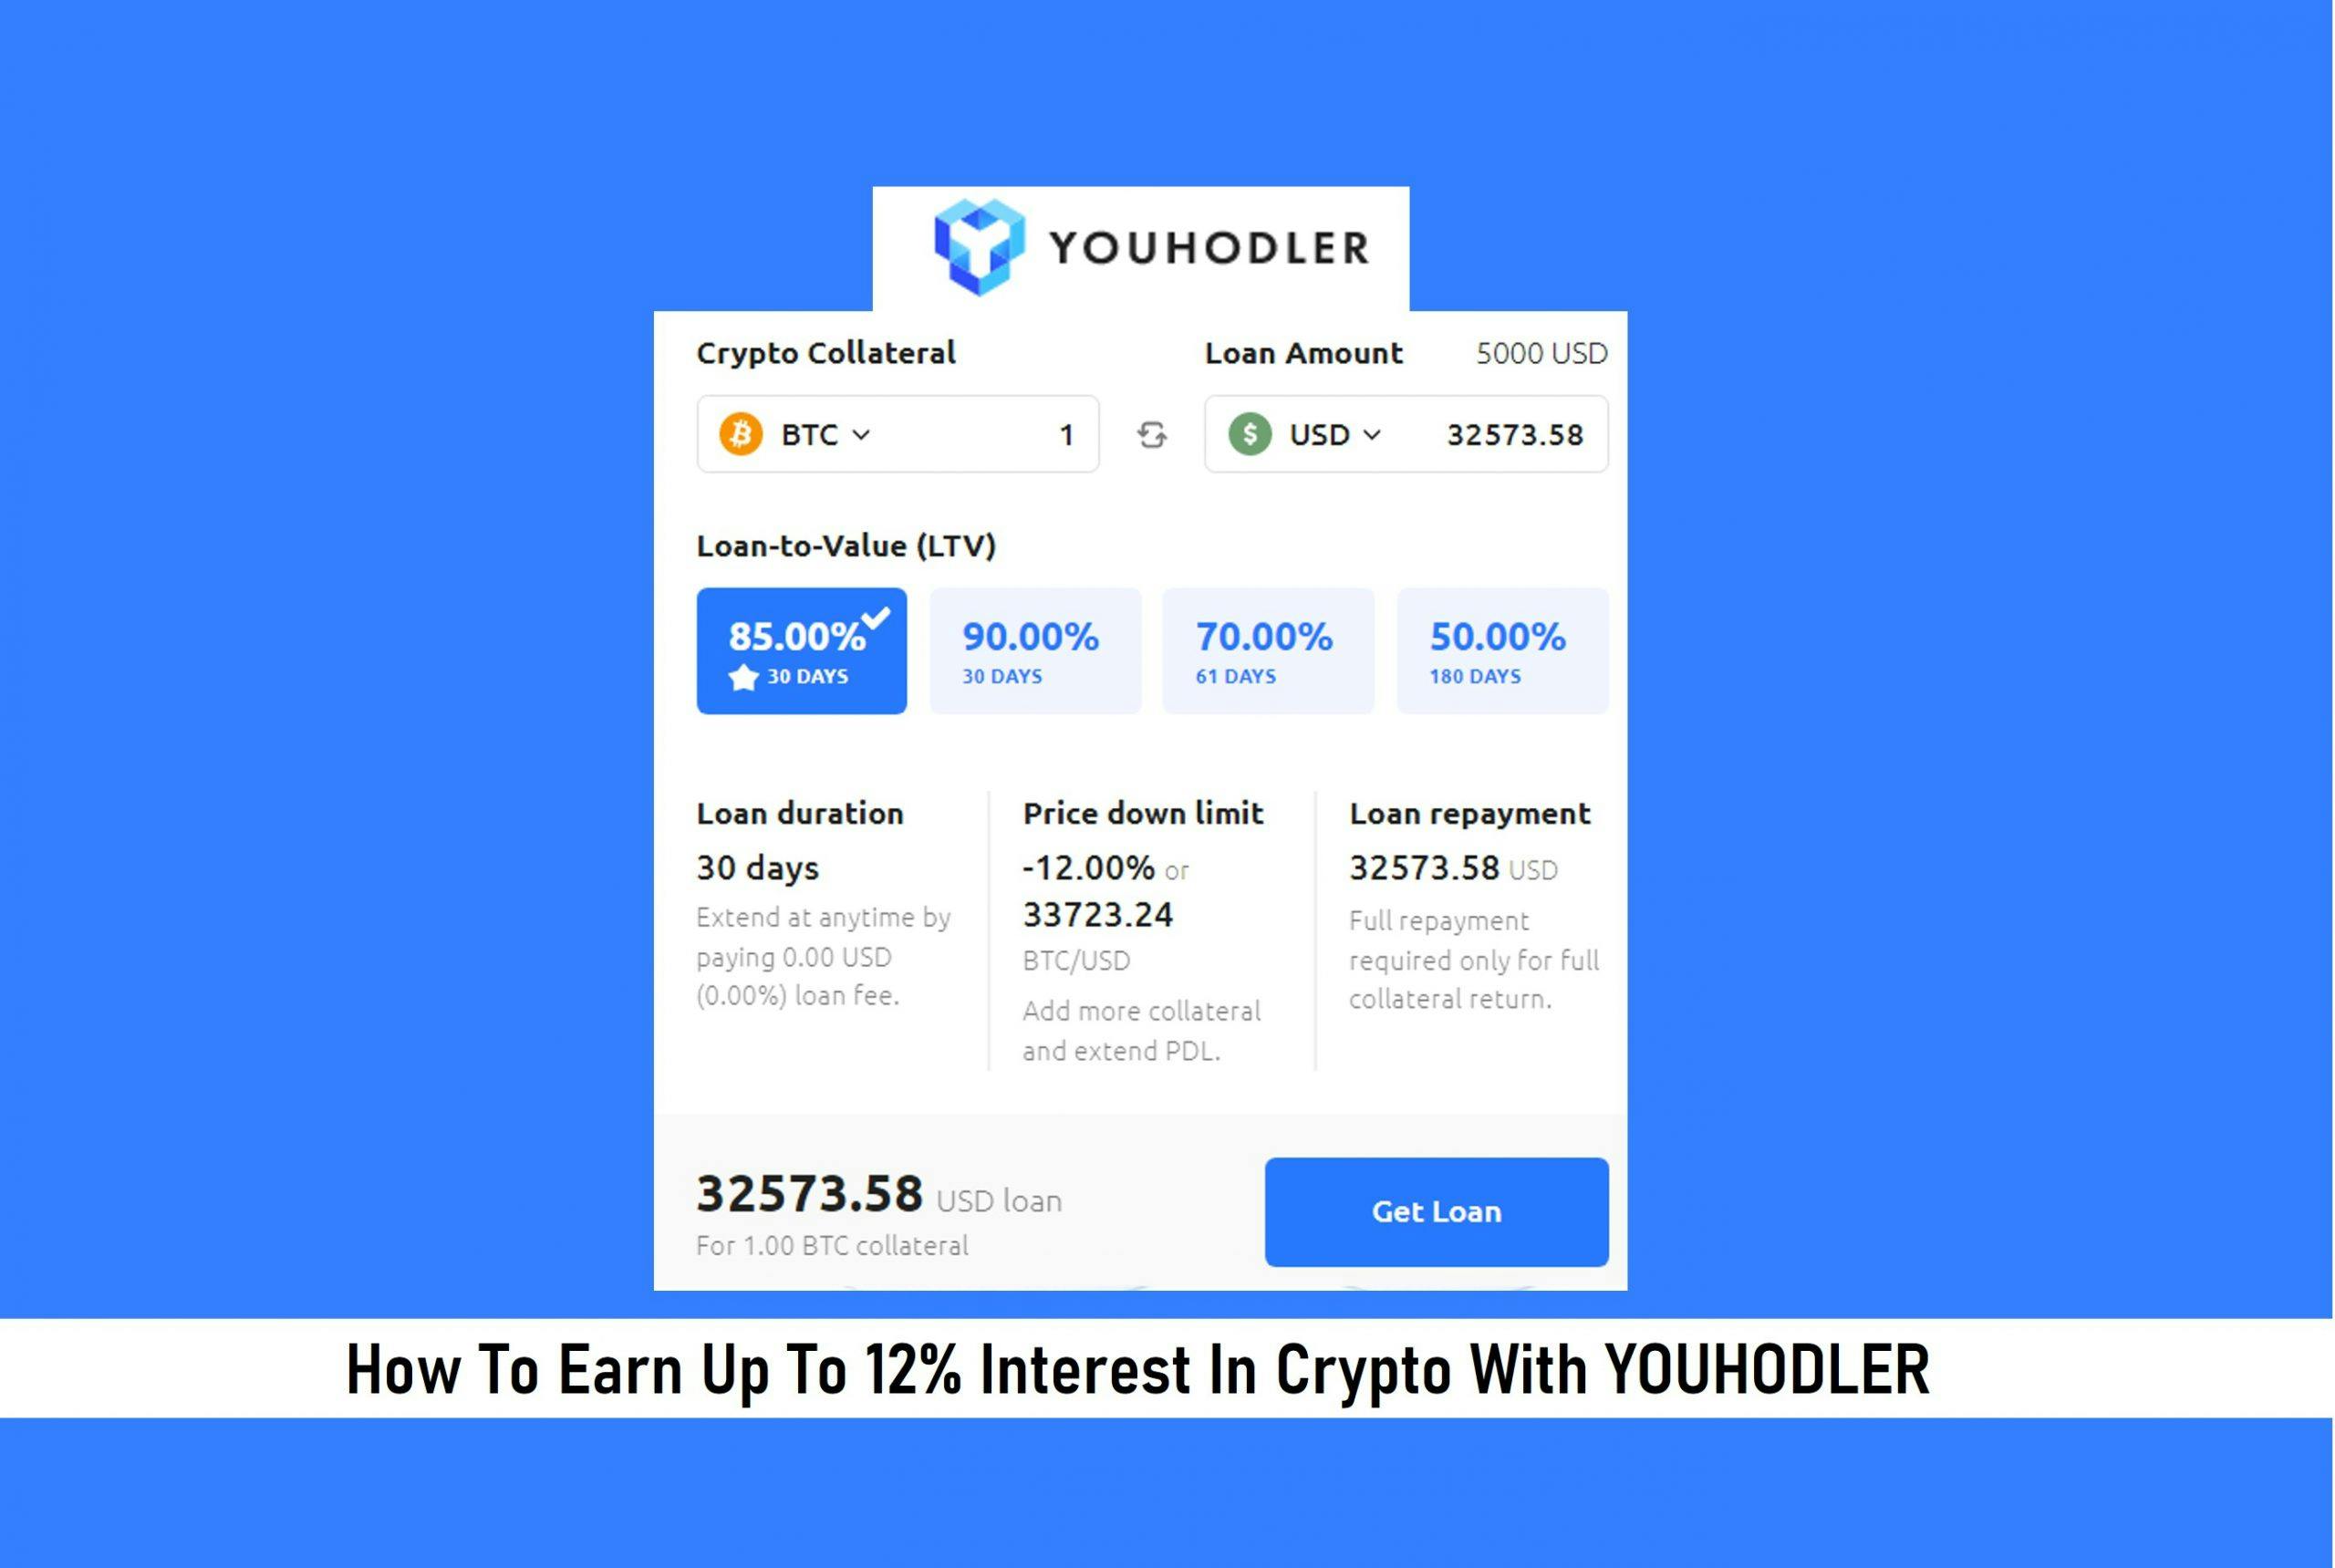 How To Earn Up To 12% Interest In Crypto With YouHodler